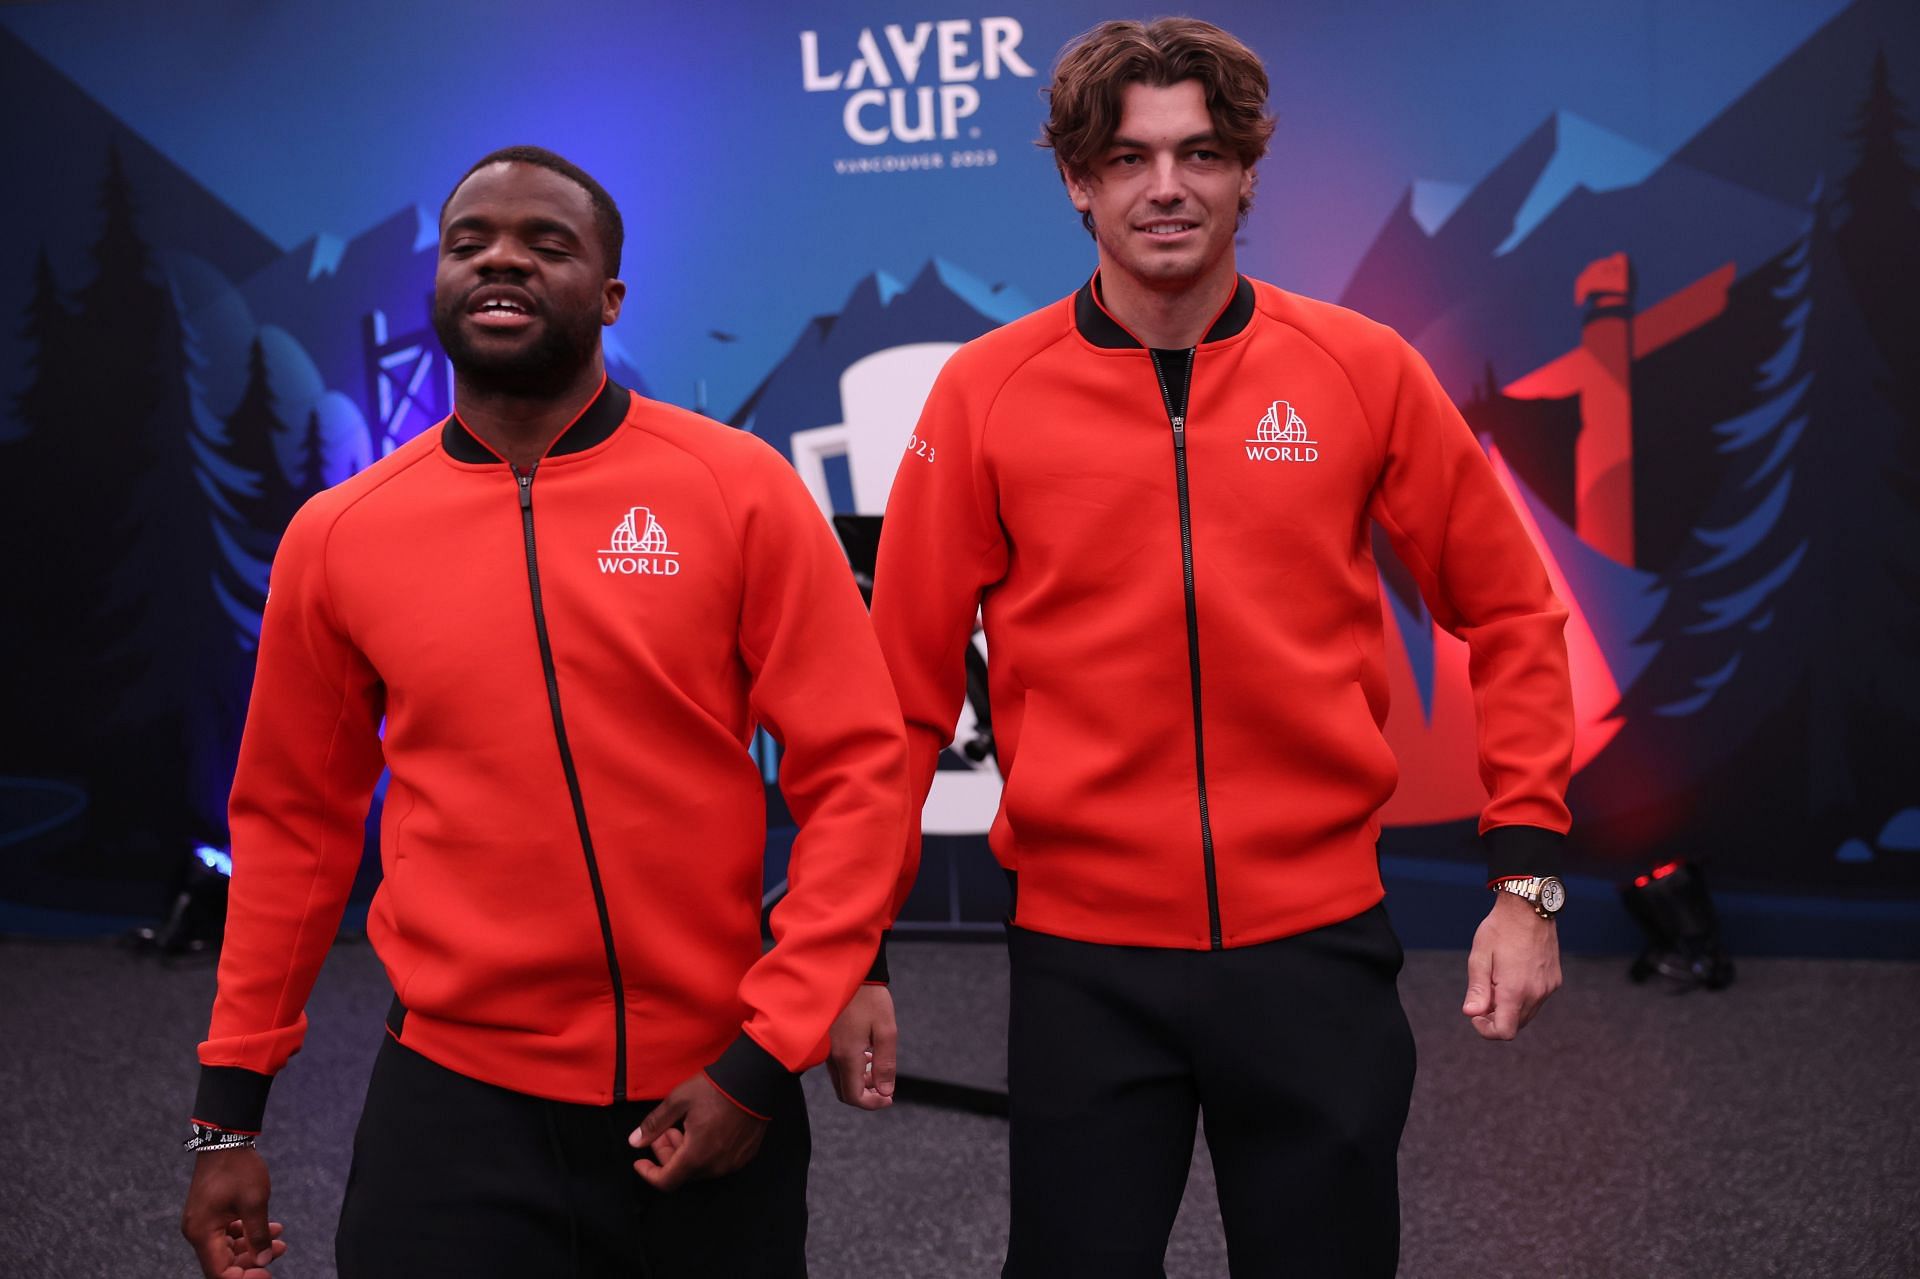 Frances Tiafoe(left) and Taylor Fritz(right) at the 2023 Laver Cup previews